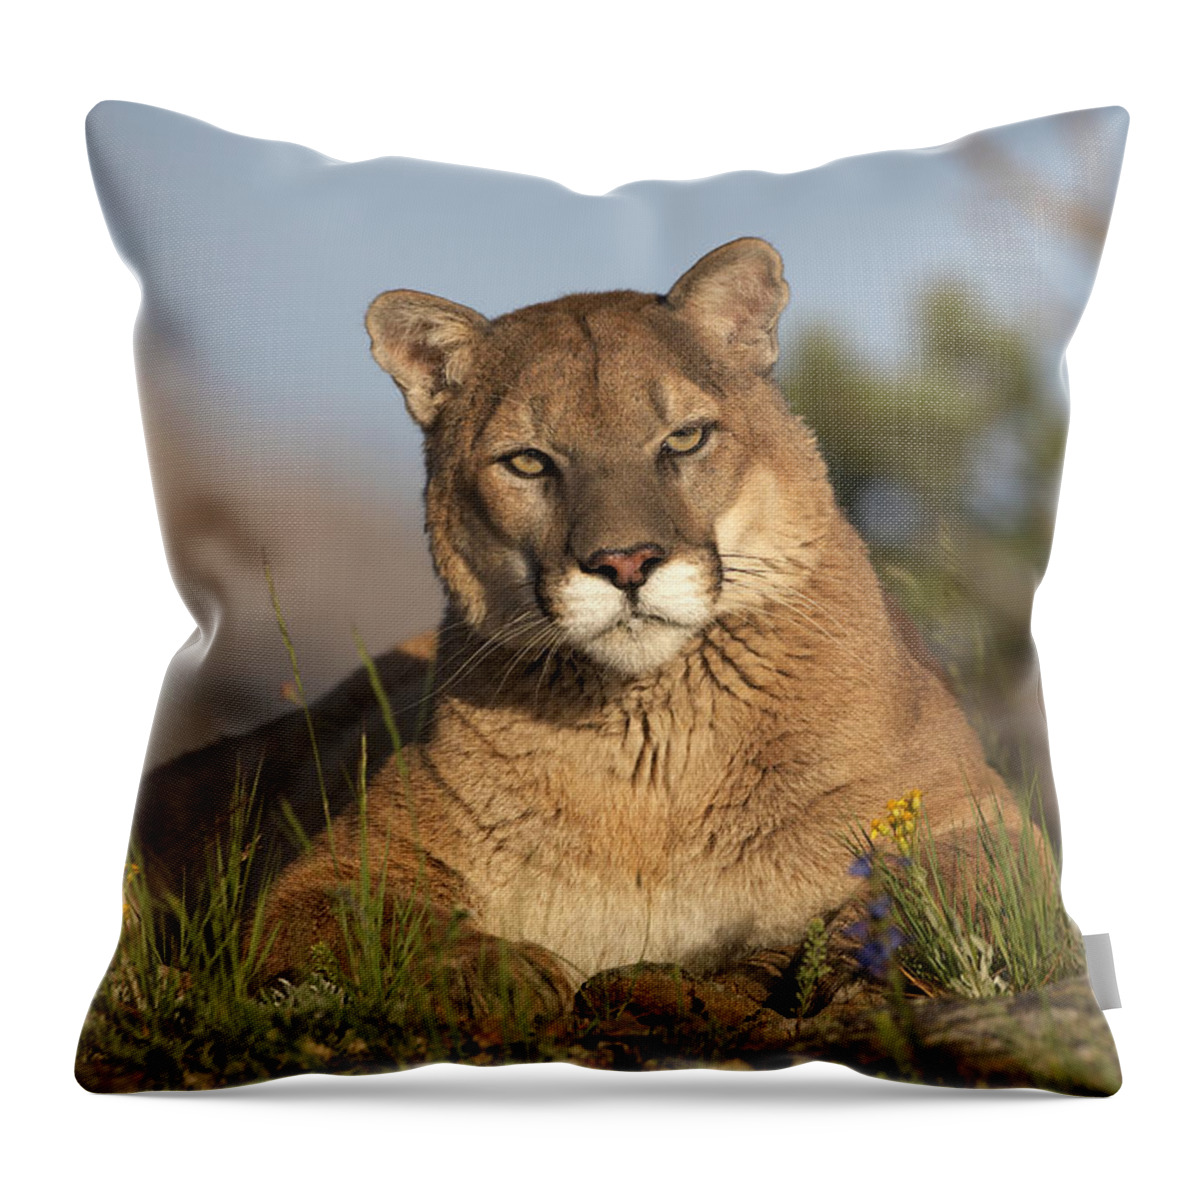 00176554 Throw Pillow featuring the photograph Mountain Lion Portrait North America by Tim Fitzharris